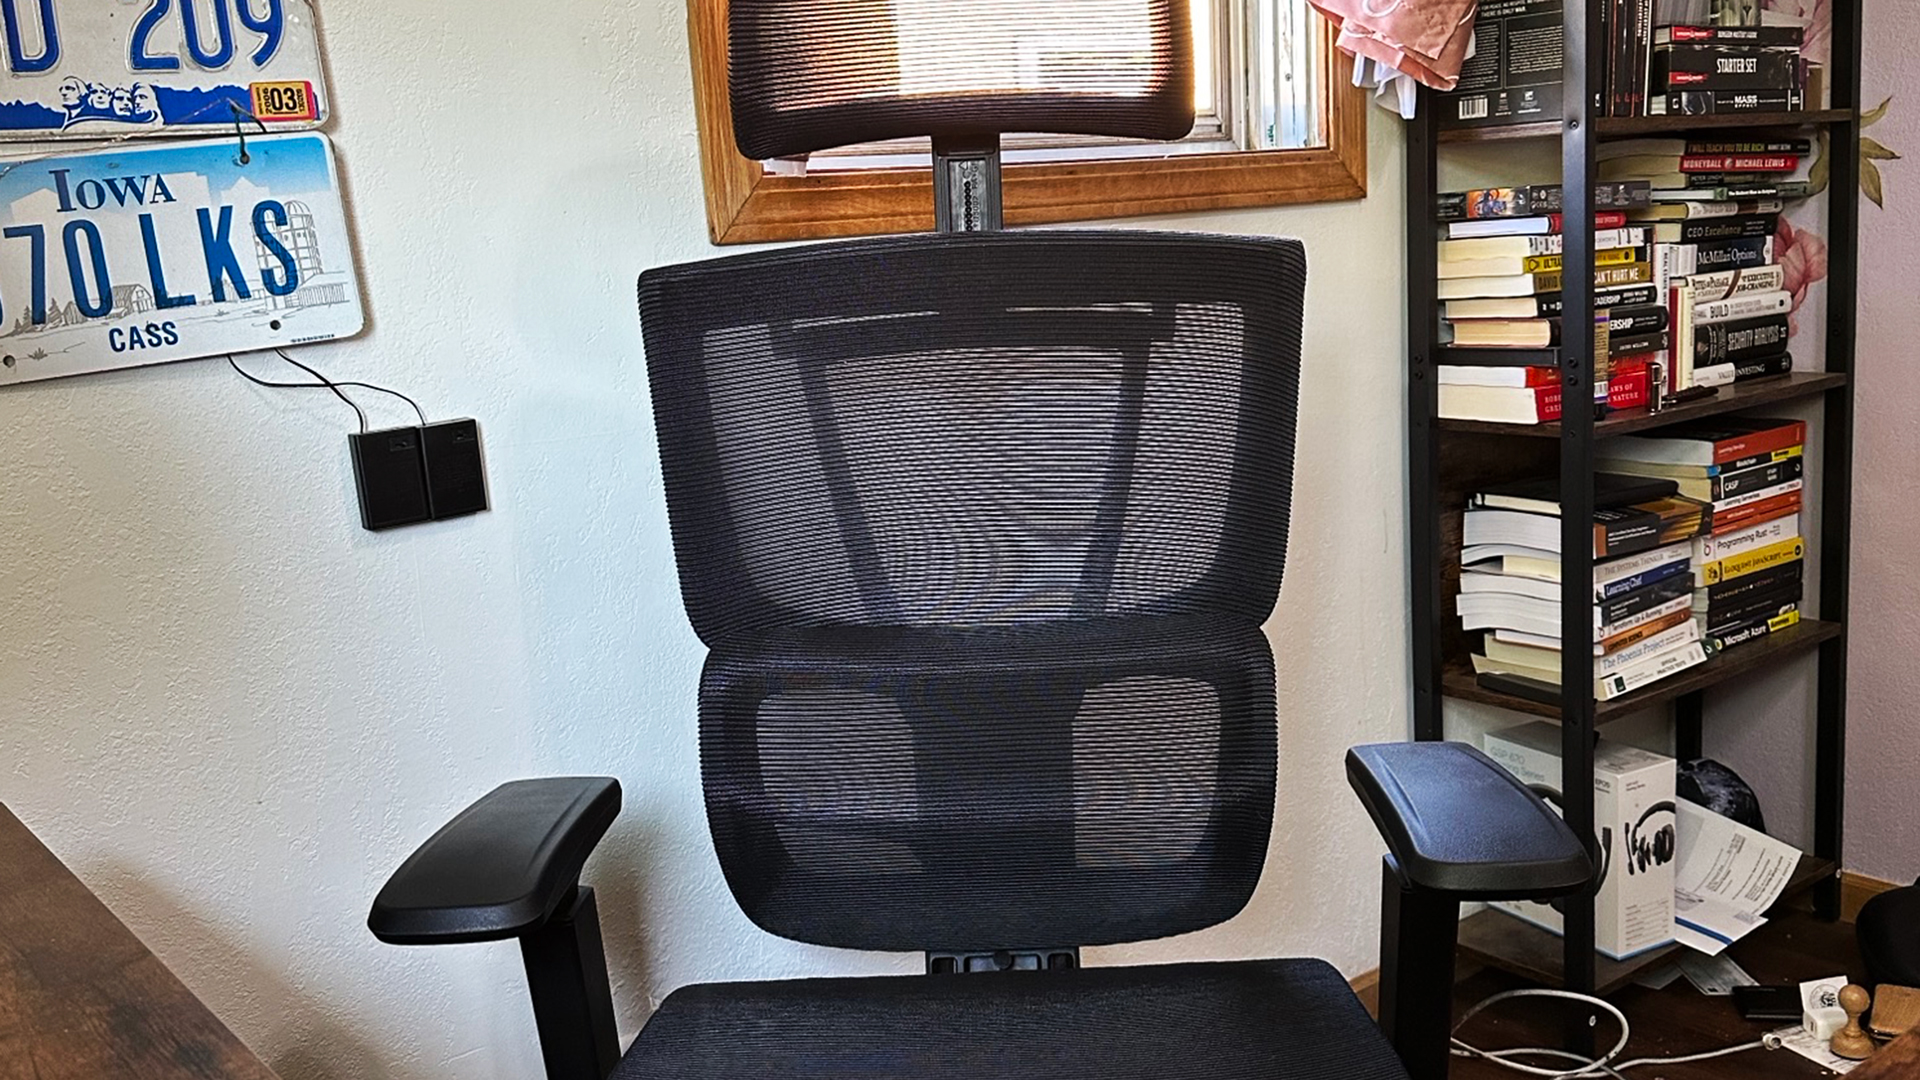 The front of the FlexiSpot C7 office chair